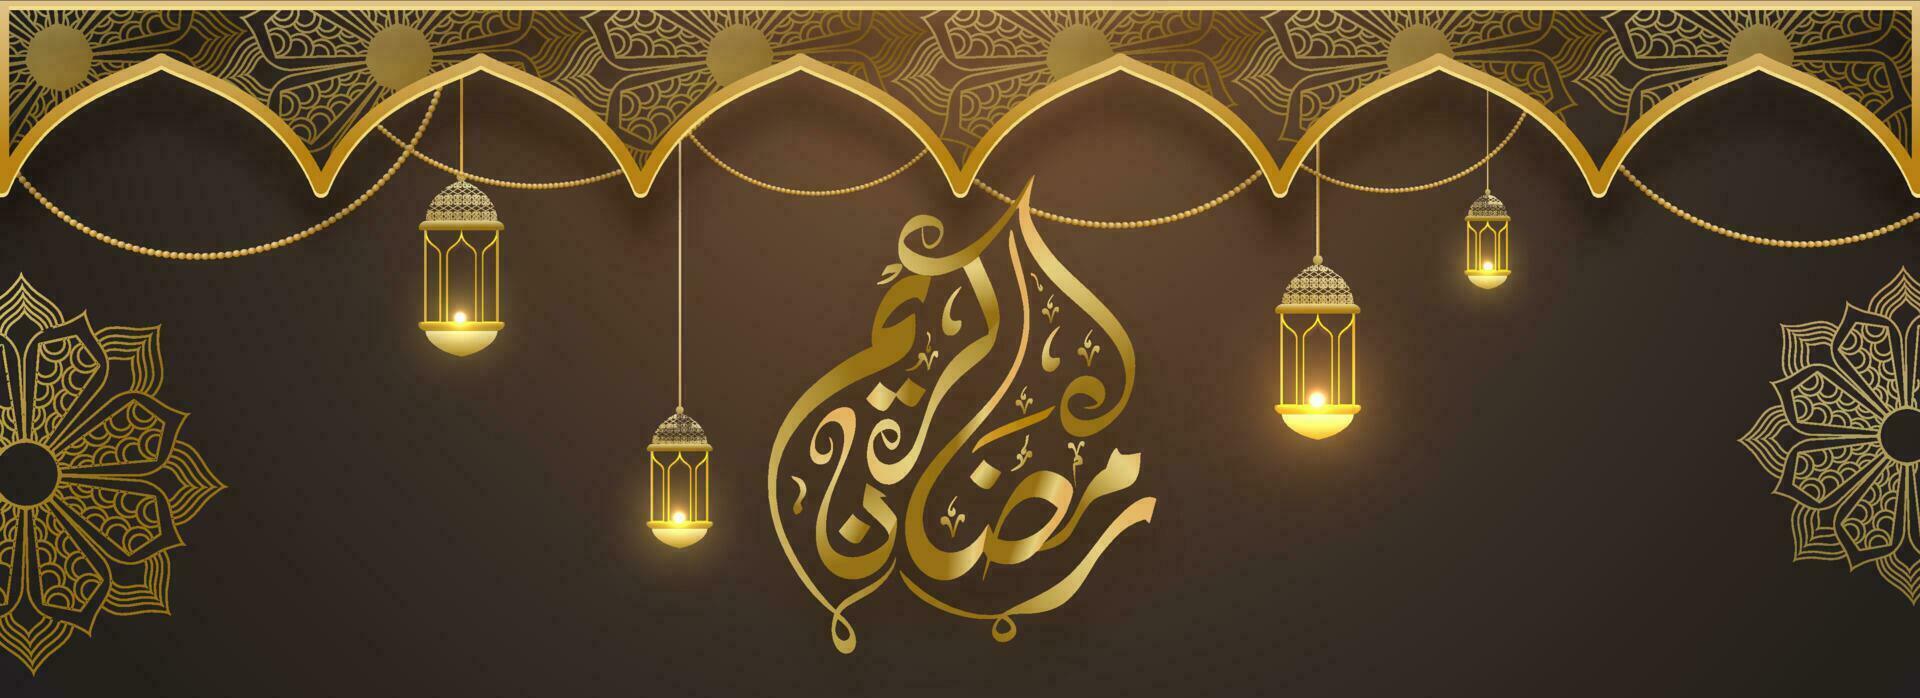 Arabic calligraphy of Ramadan Kareem and hanging illuminated lanterns decorated on brown background. Header or banner design. vector